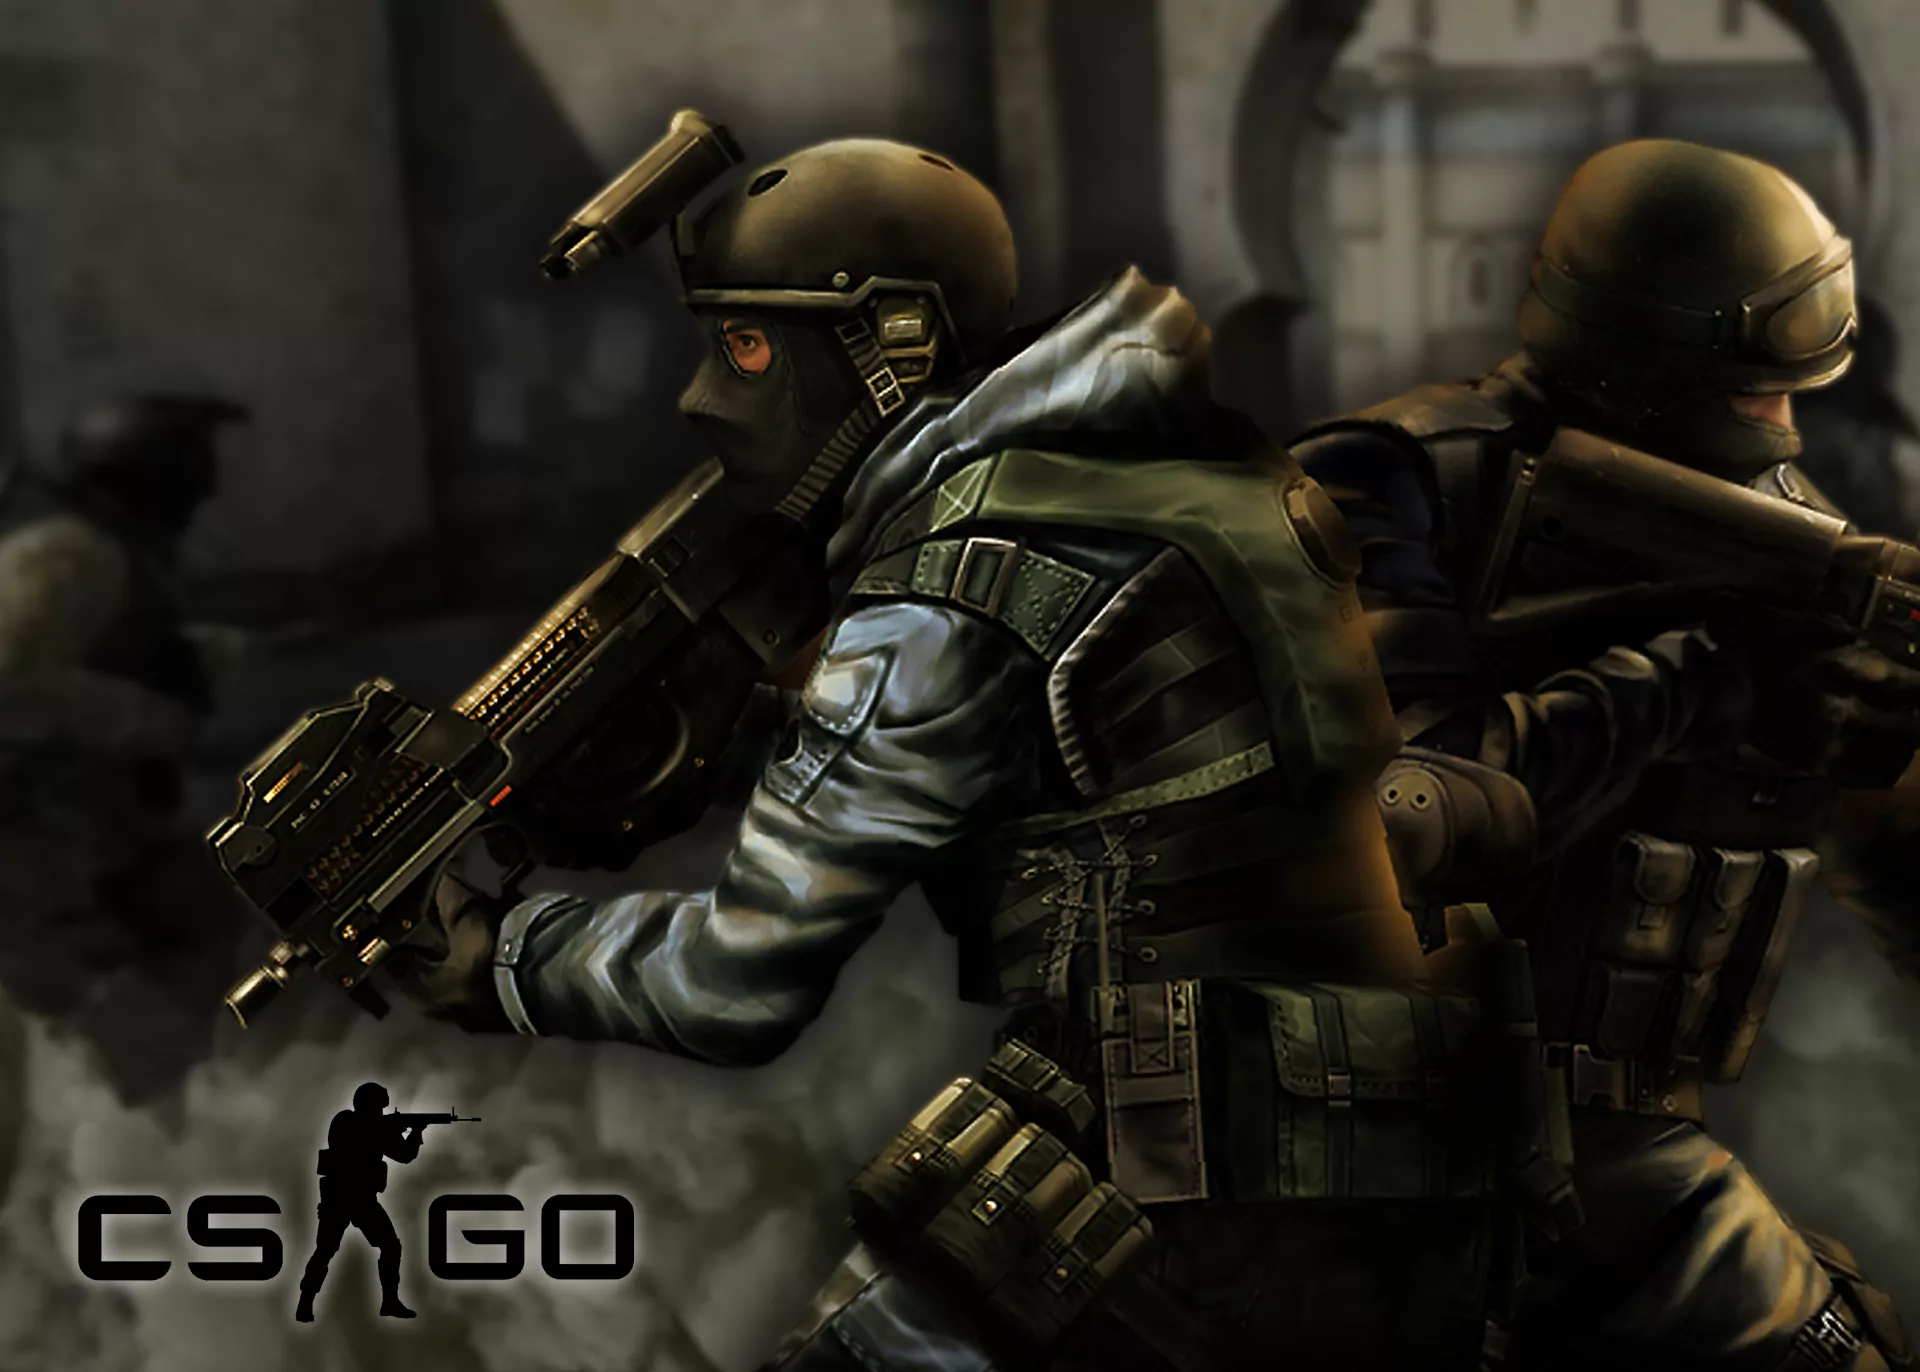 If you like shooters, we recommend looking for a possibility to place bets at the CS:GO tournaments.